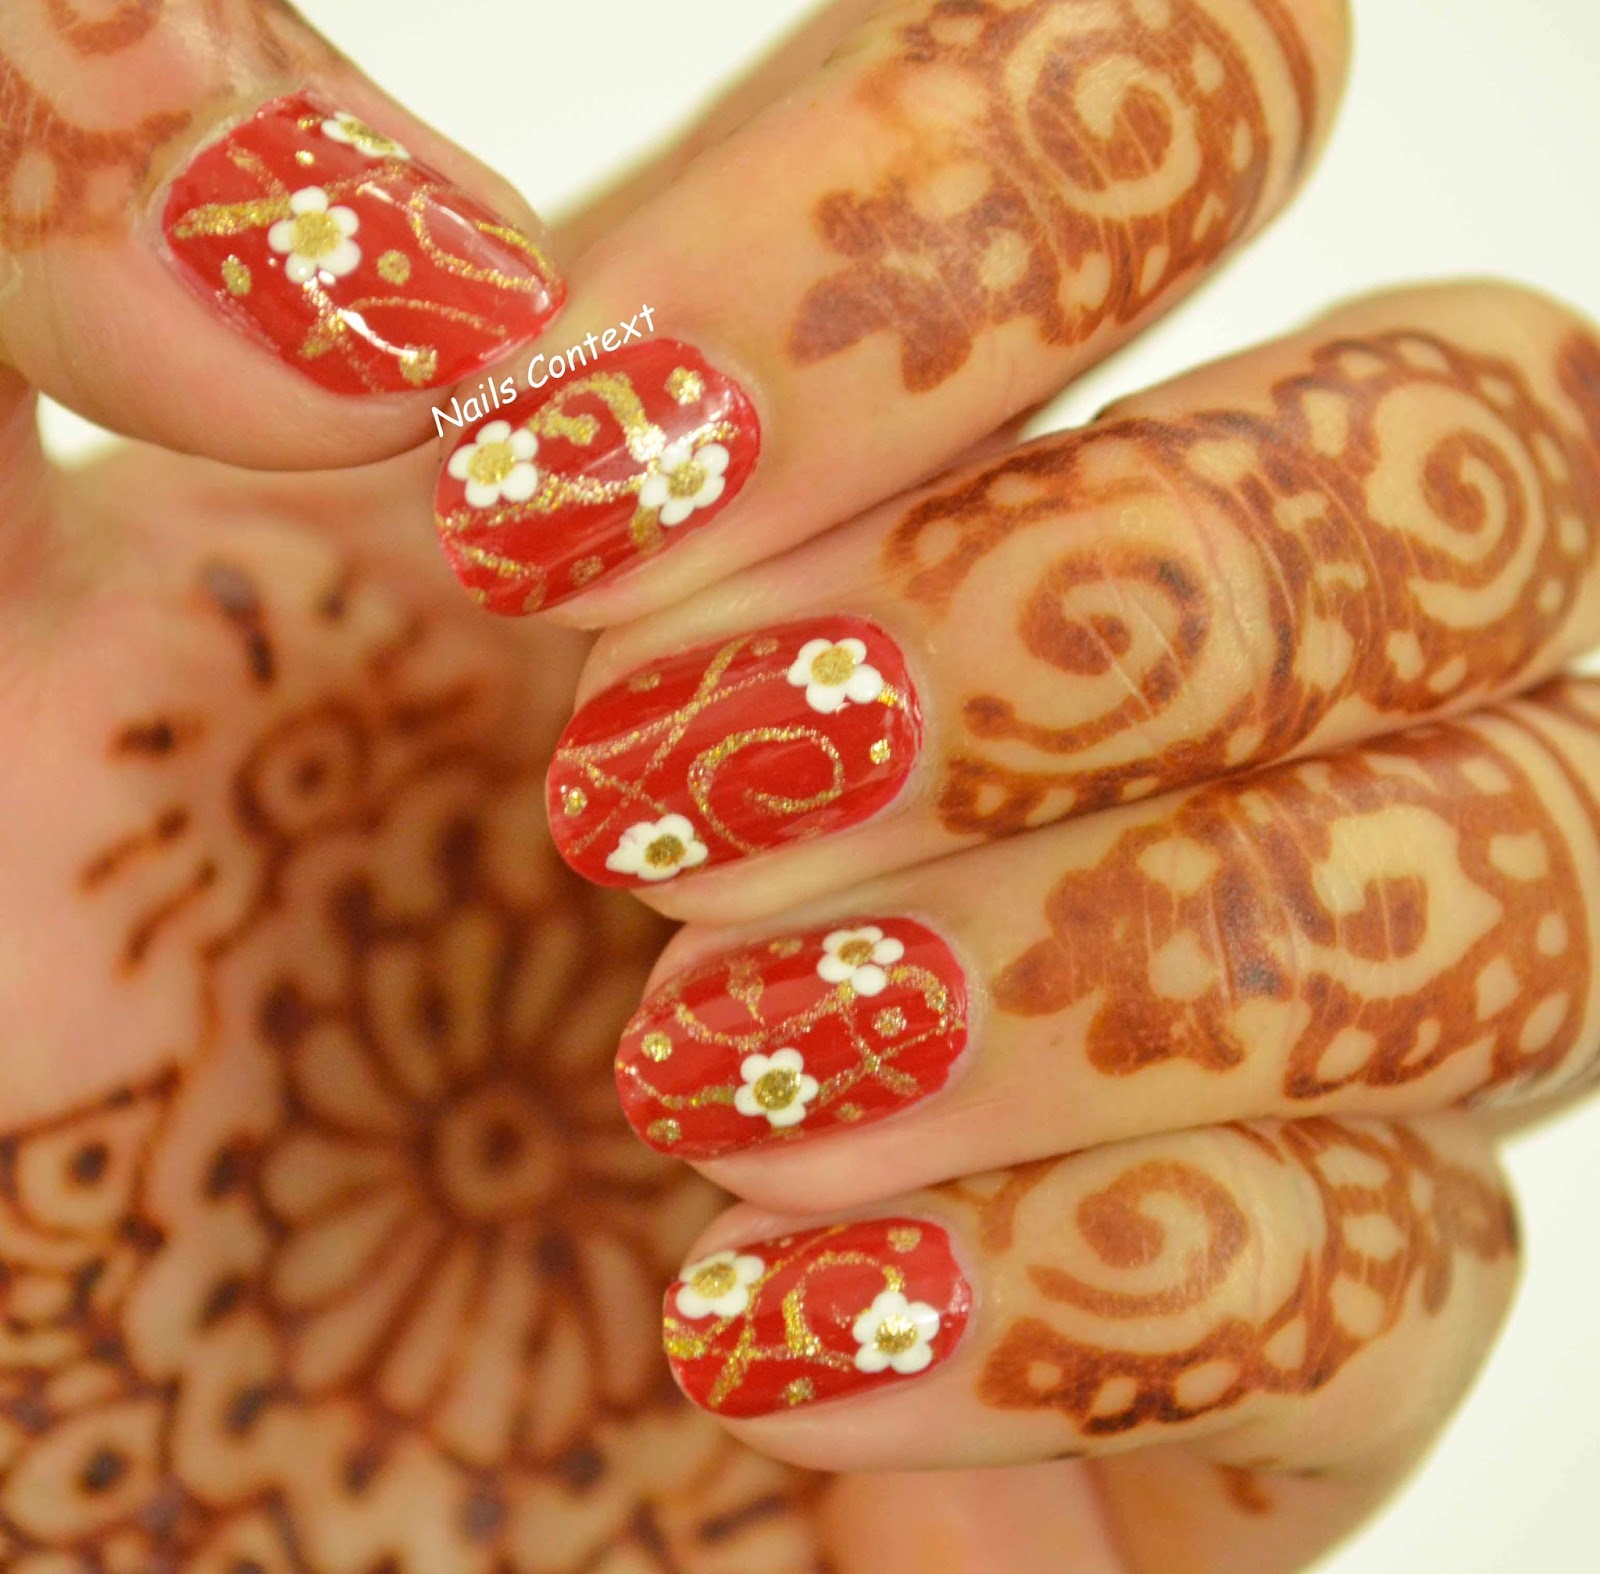 Trendy And Gorgeous Nail Art Designs For All The Indian Brides To Rock  Their Nail Fashion On D-Day -